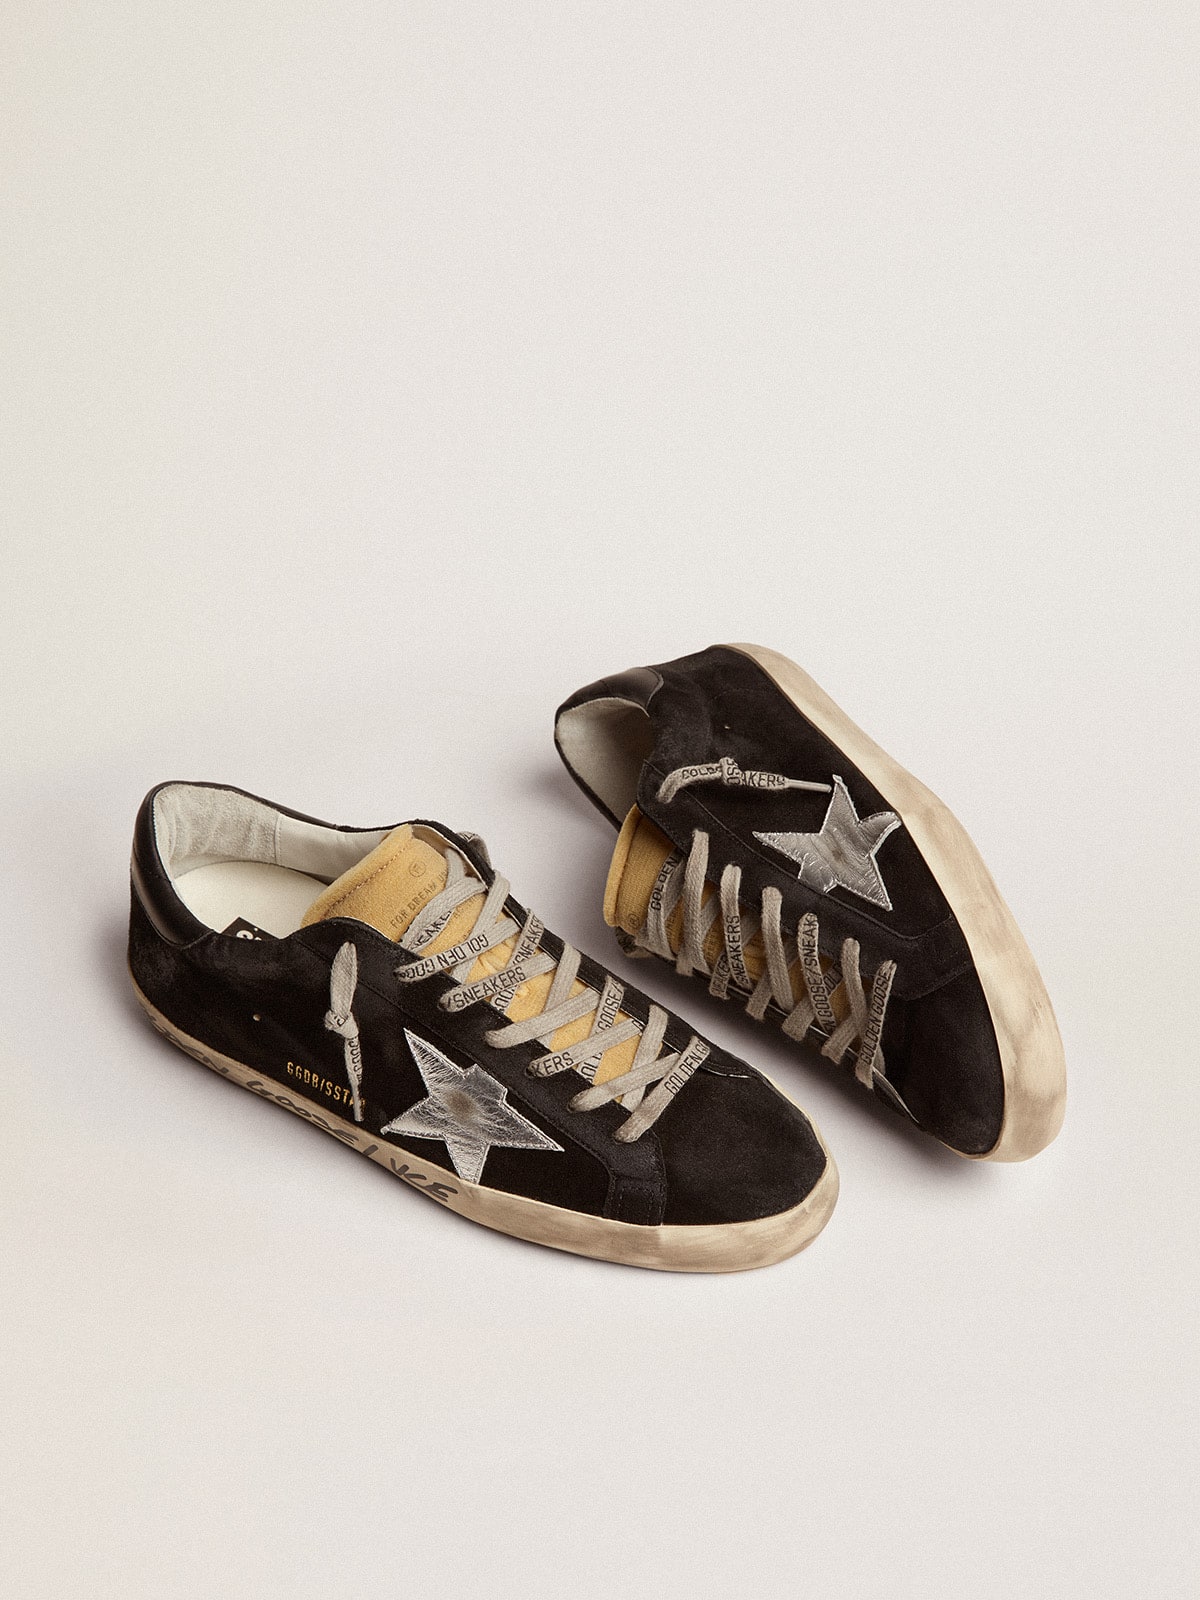 Men's Super-Star in black suede with silver laminated leather star